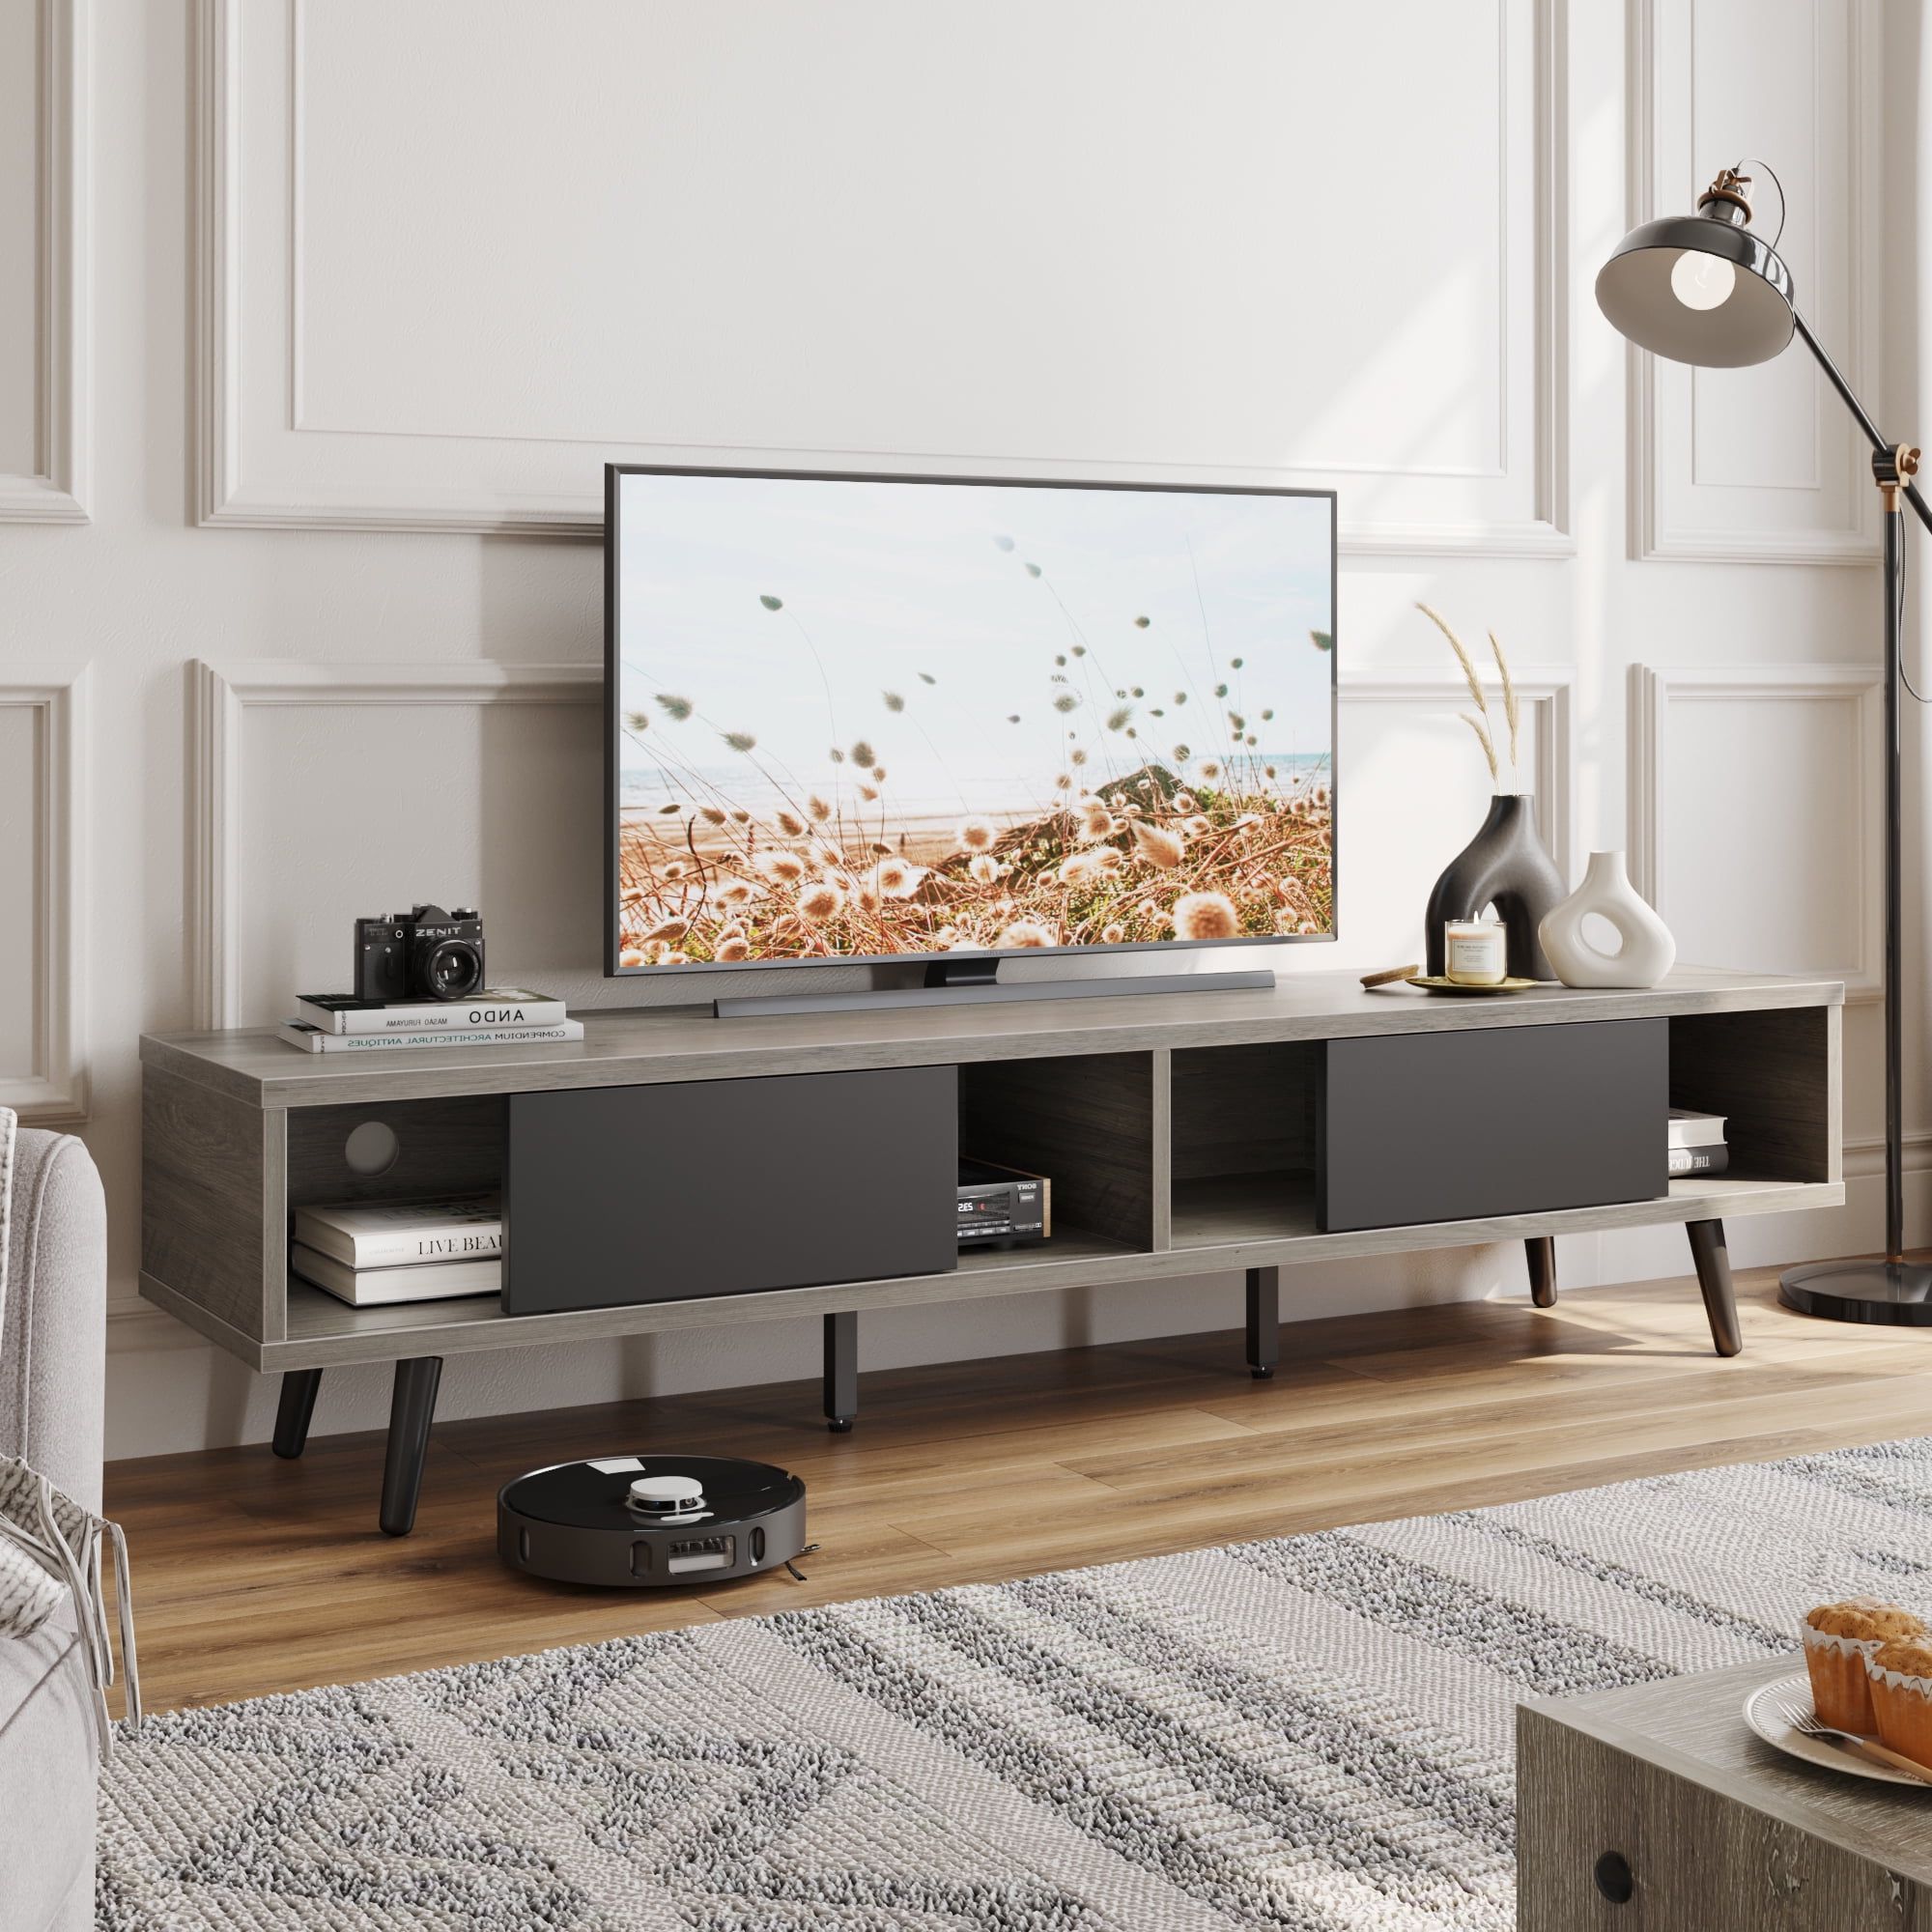 2019 Bestier Tv Stand For Tvs Up To 75" Intended For Bestier Mid Century Modern Tv Stand For Tvs Up To 75" With Storage (View 5 of 15)